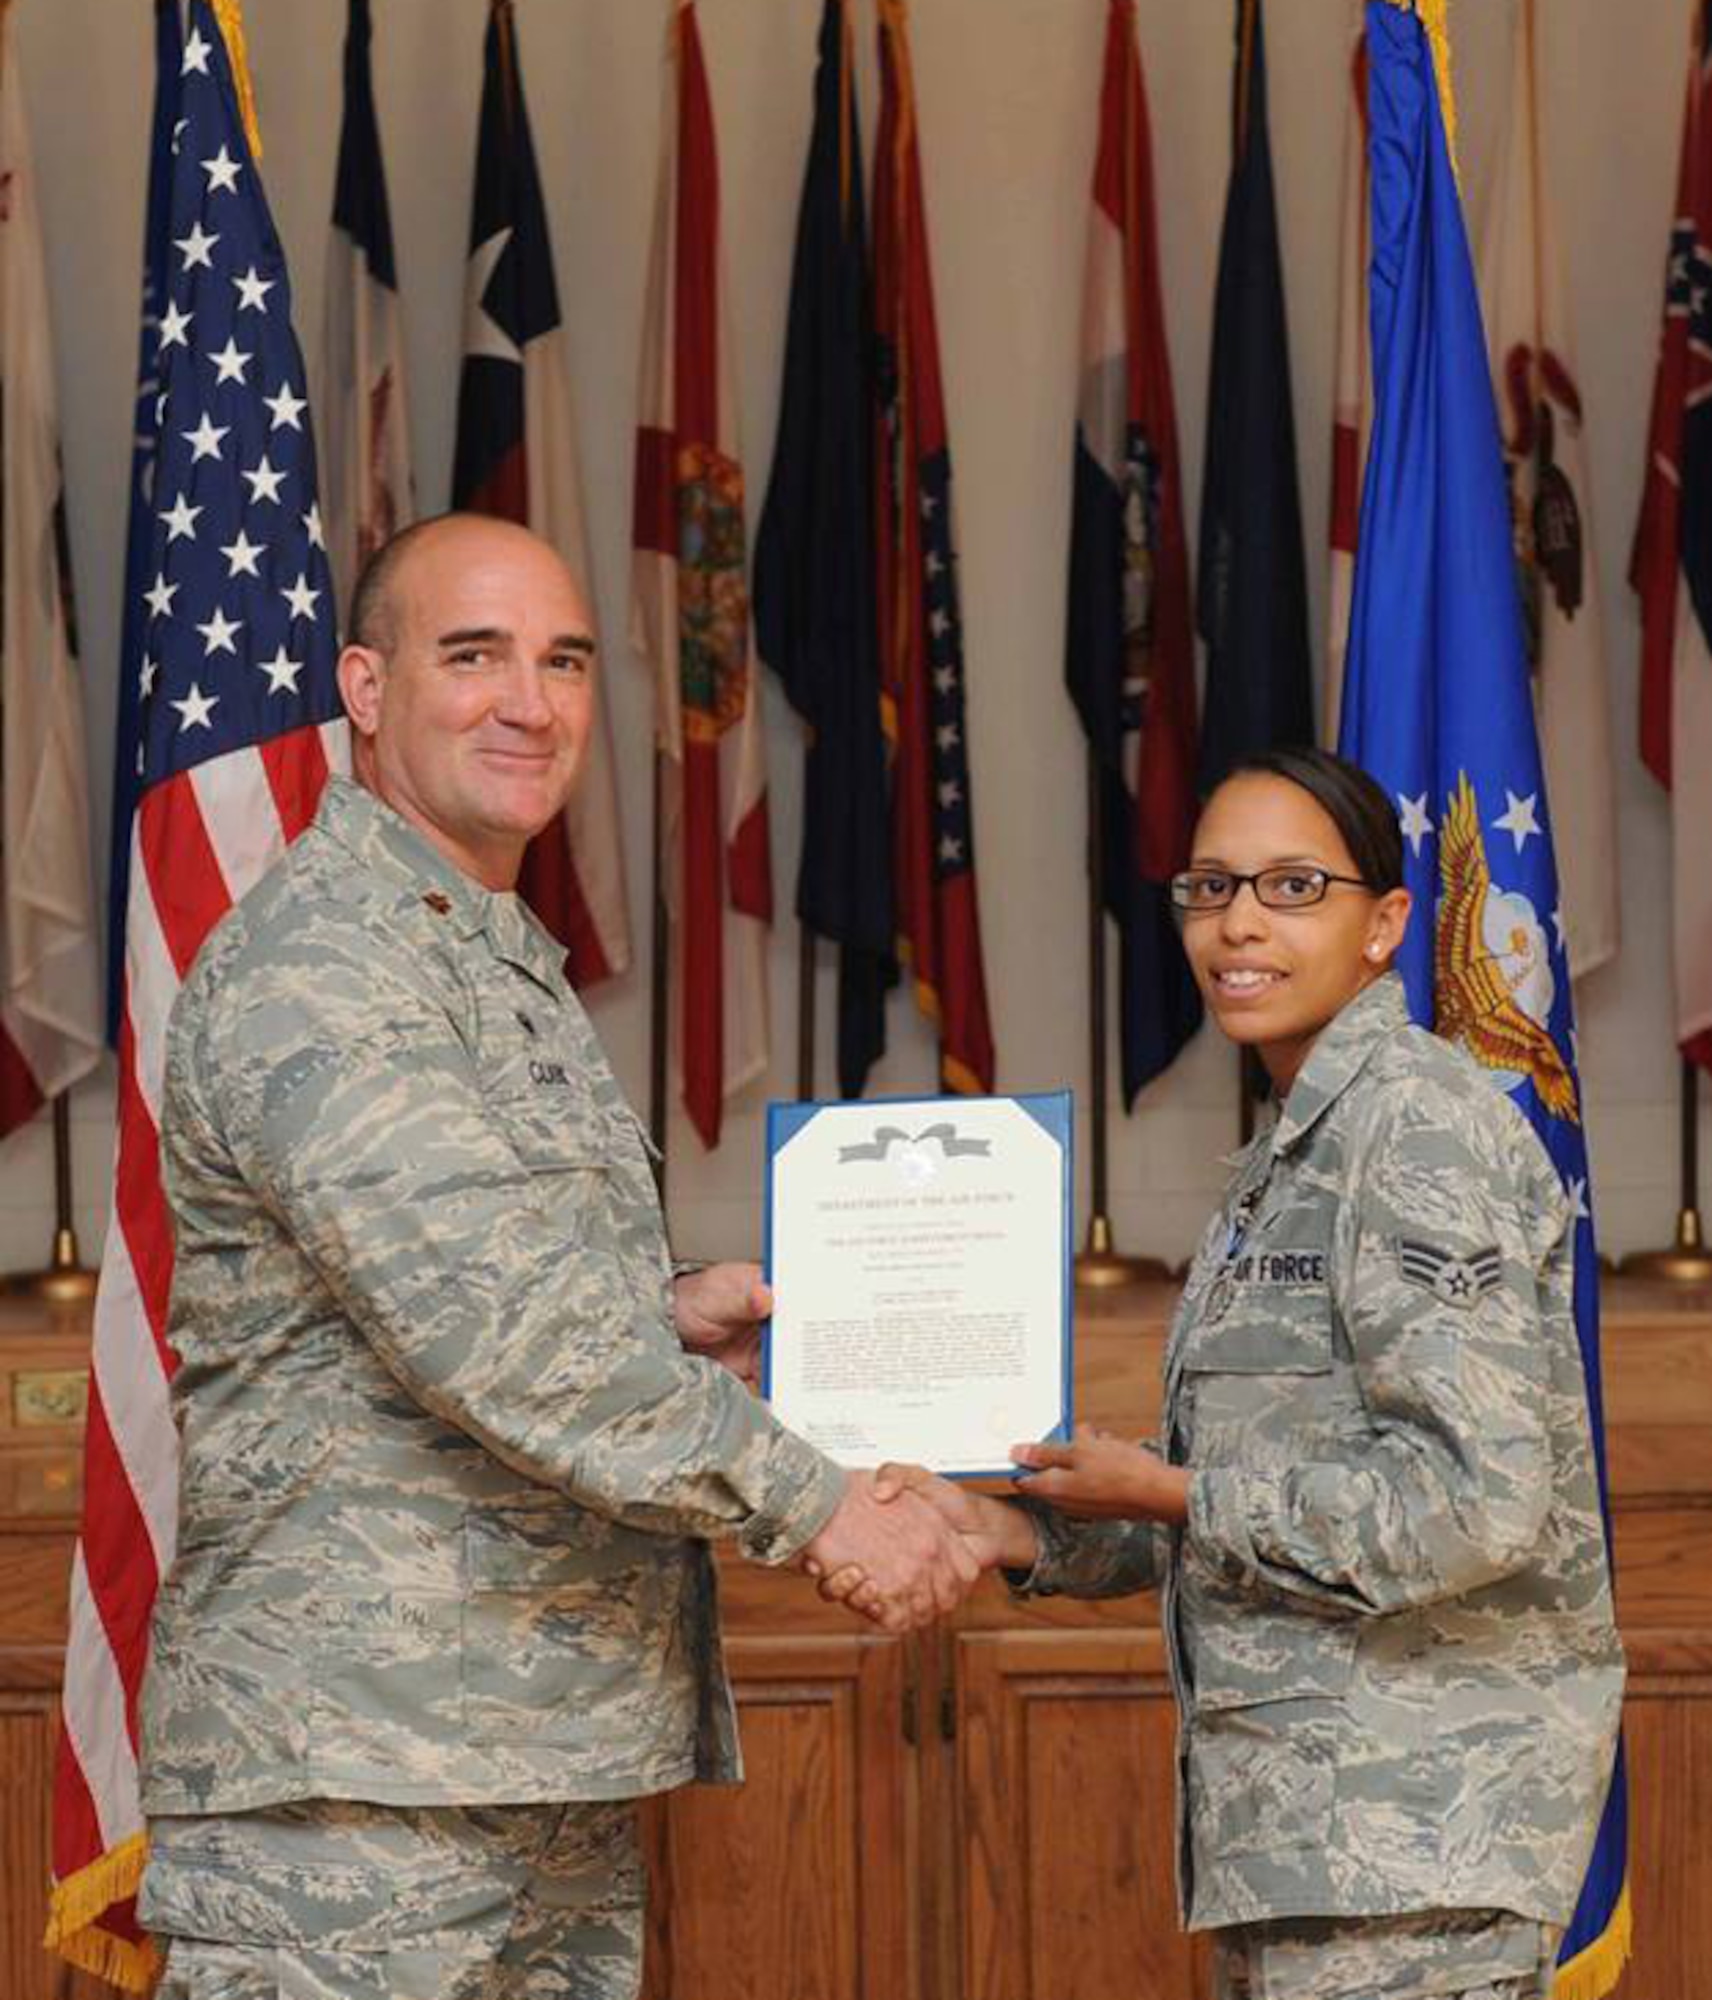 U.S. Air Force Maj. Brant Clark, 7th Comptroller Squadron commander, awards Senior Airman Shannon Hall, 7th Bomb Wing Public Affairs photojournalist the Air Force Achievement Medal April 23, 2014, at Dyess Air Force Base, Texas.  Hall received the medal after completing numerous hours of funerals, retirements and other ceremonies while a member of the Dyess Honor Guard. (U.S. Air Force photo by Airman 1st Class Alexander Guerrero/Released)